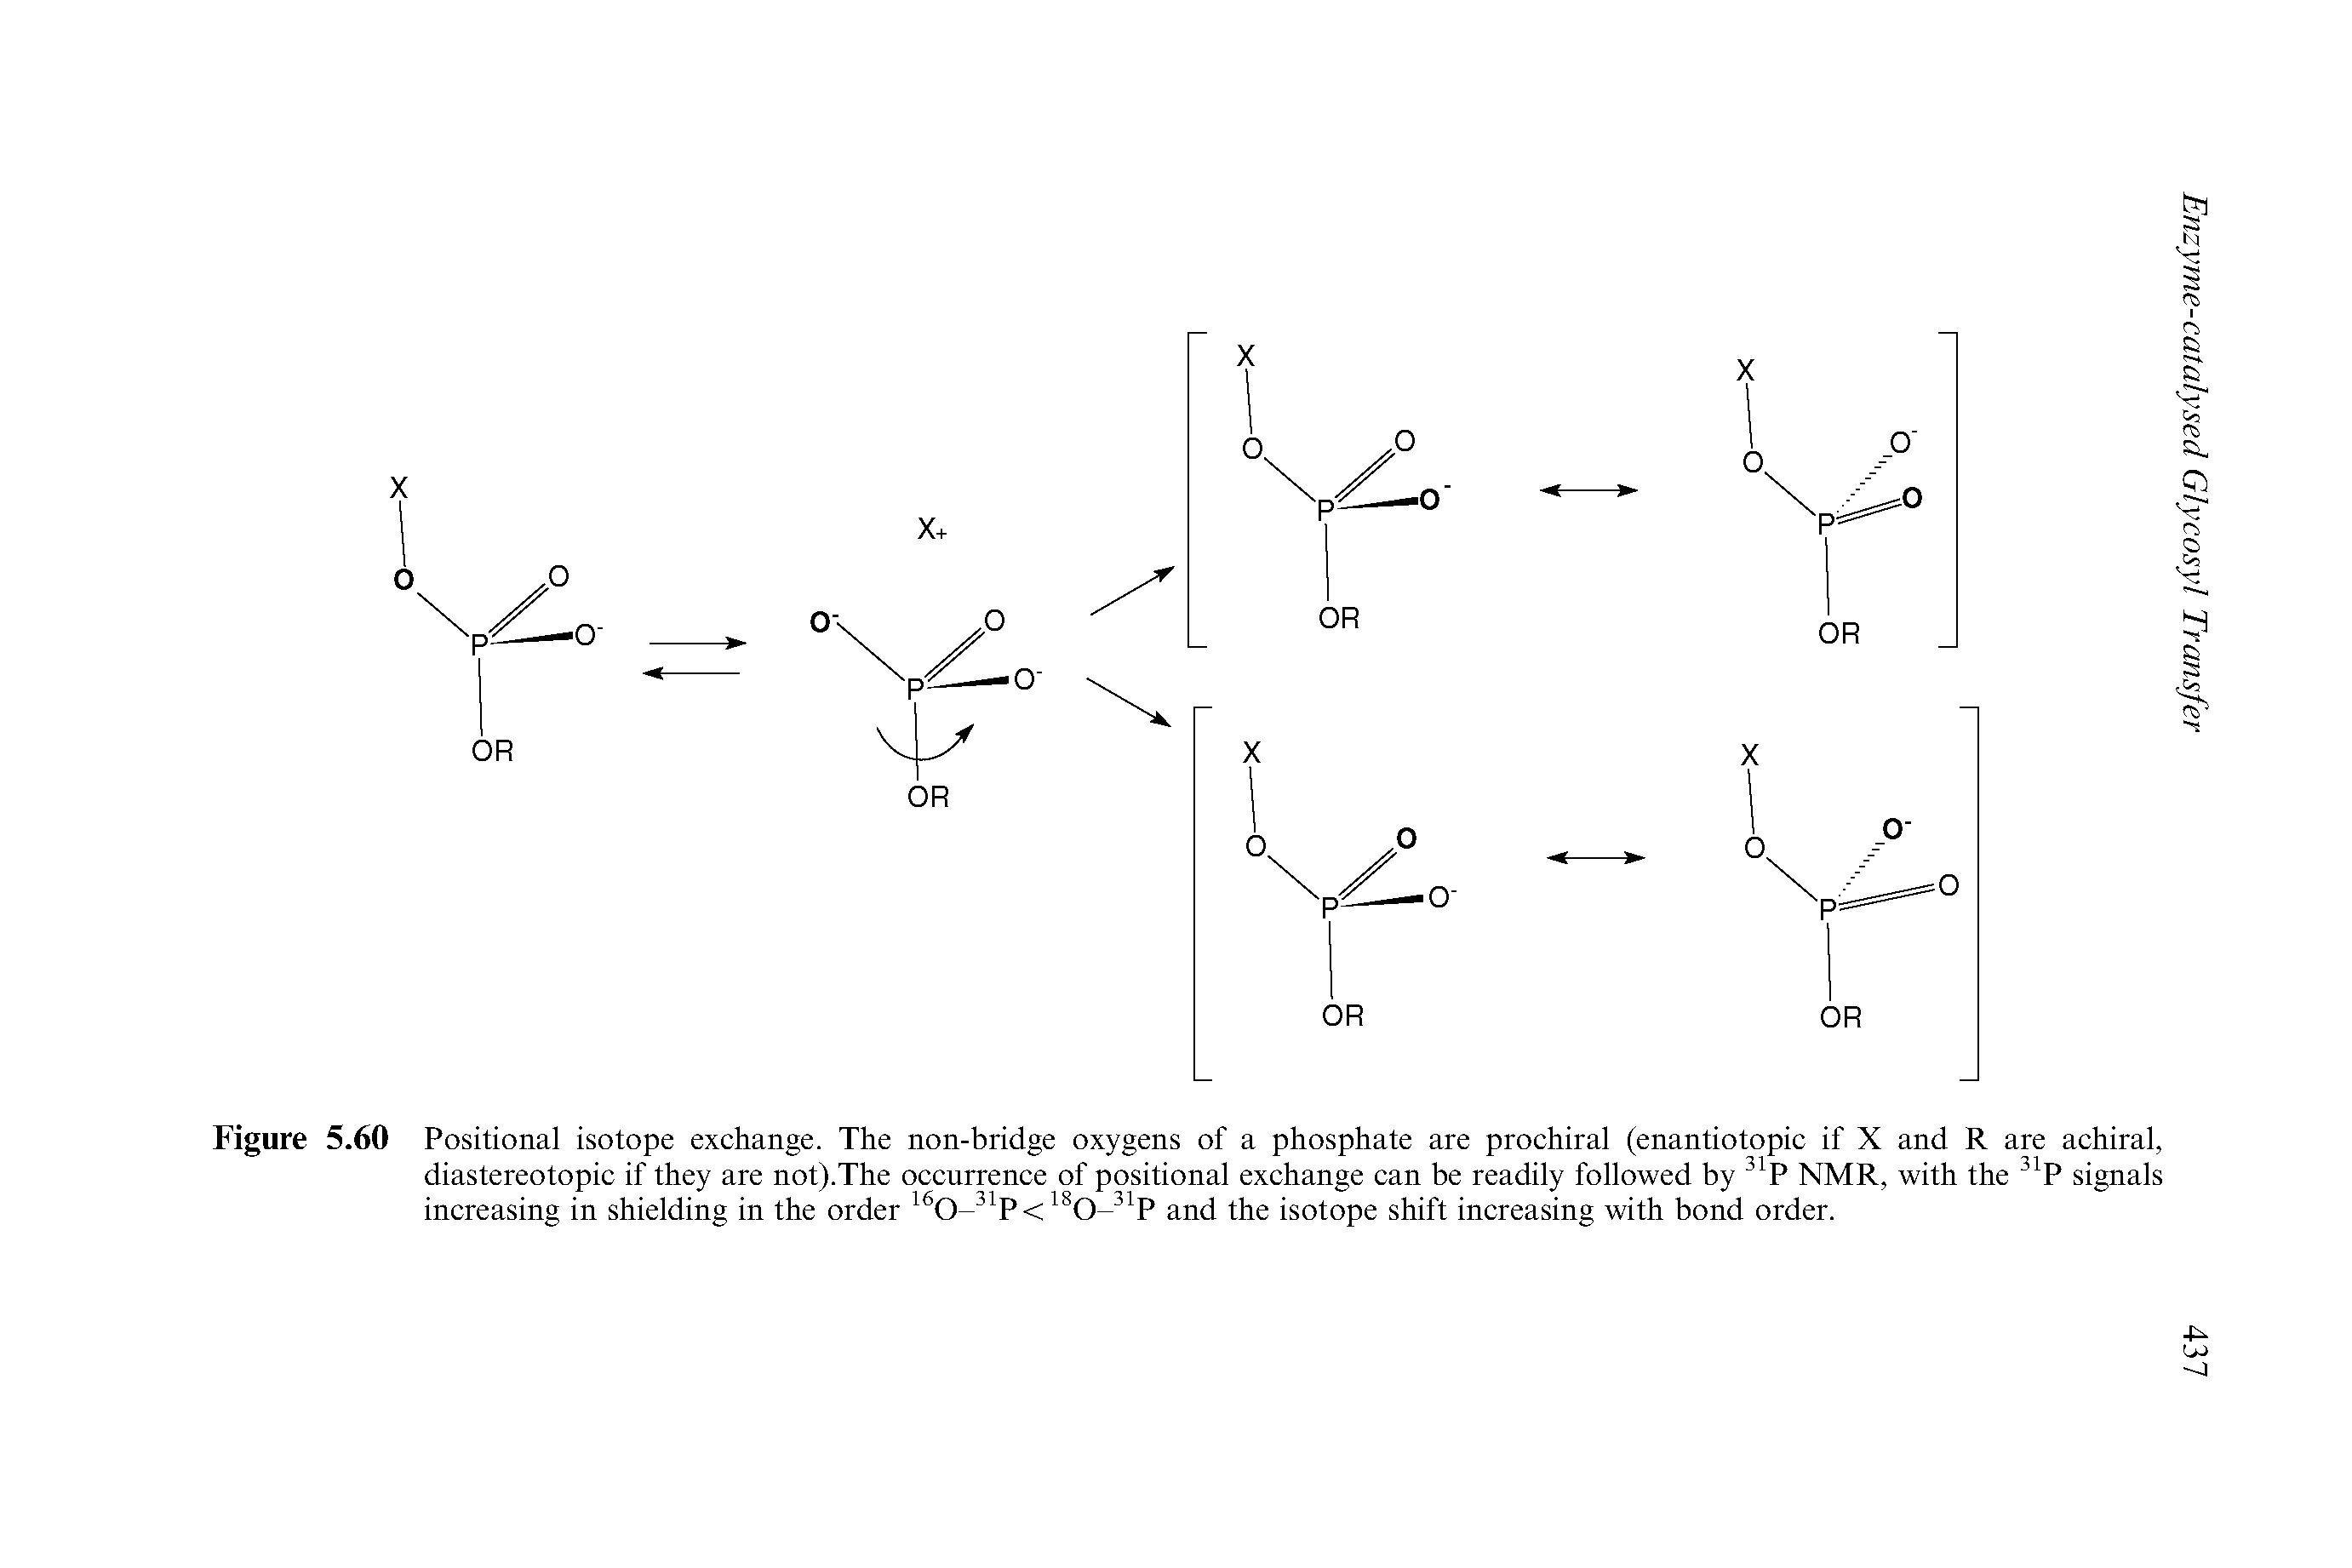 Figure 5.60 Positional isotope exchange. The non-bridge oxygens of a phosphate are prochiral (enantiotopic if X and R are achiral, diastereotopic if they are not).The occurrence of positional exchange can be readily followed by NMR, with the P signals increasing in shielding in the order and the isotope shift increasing with bond order.